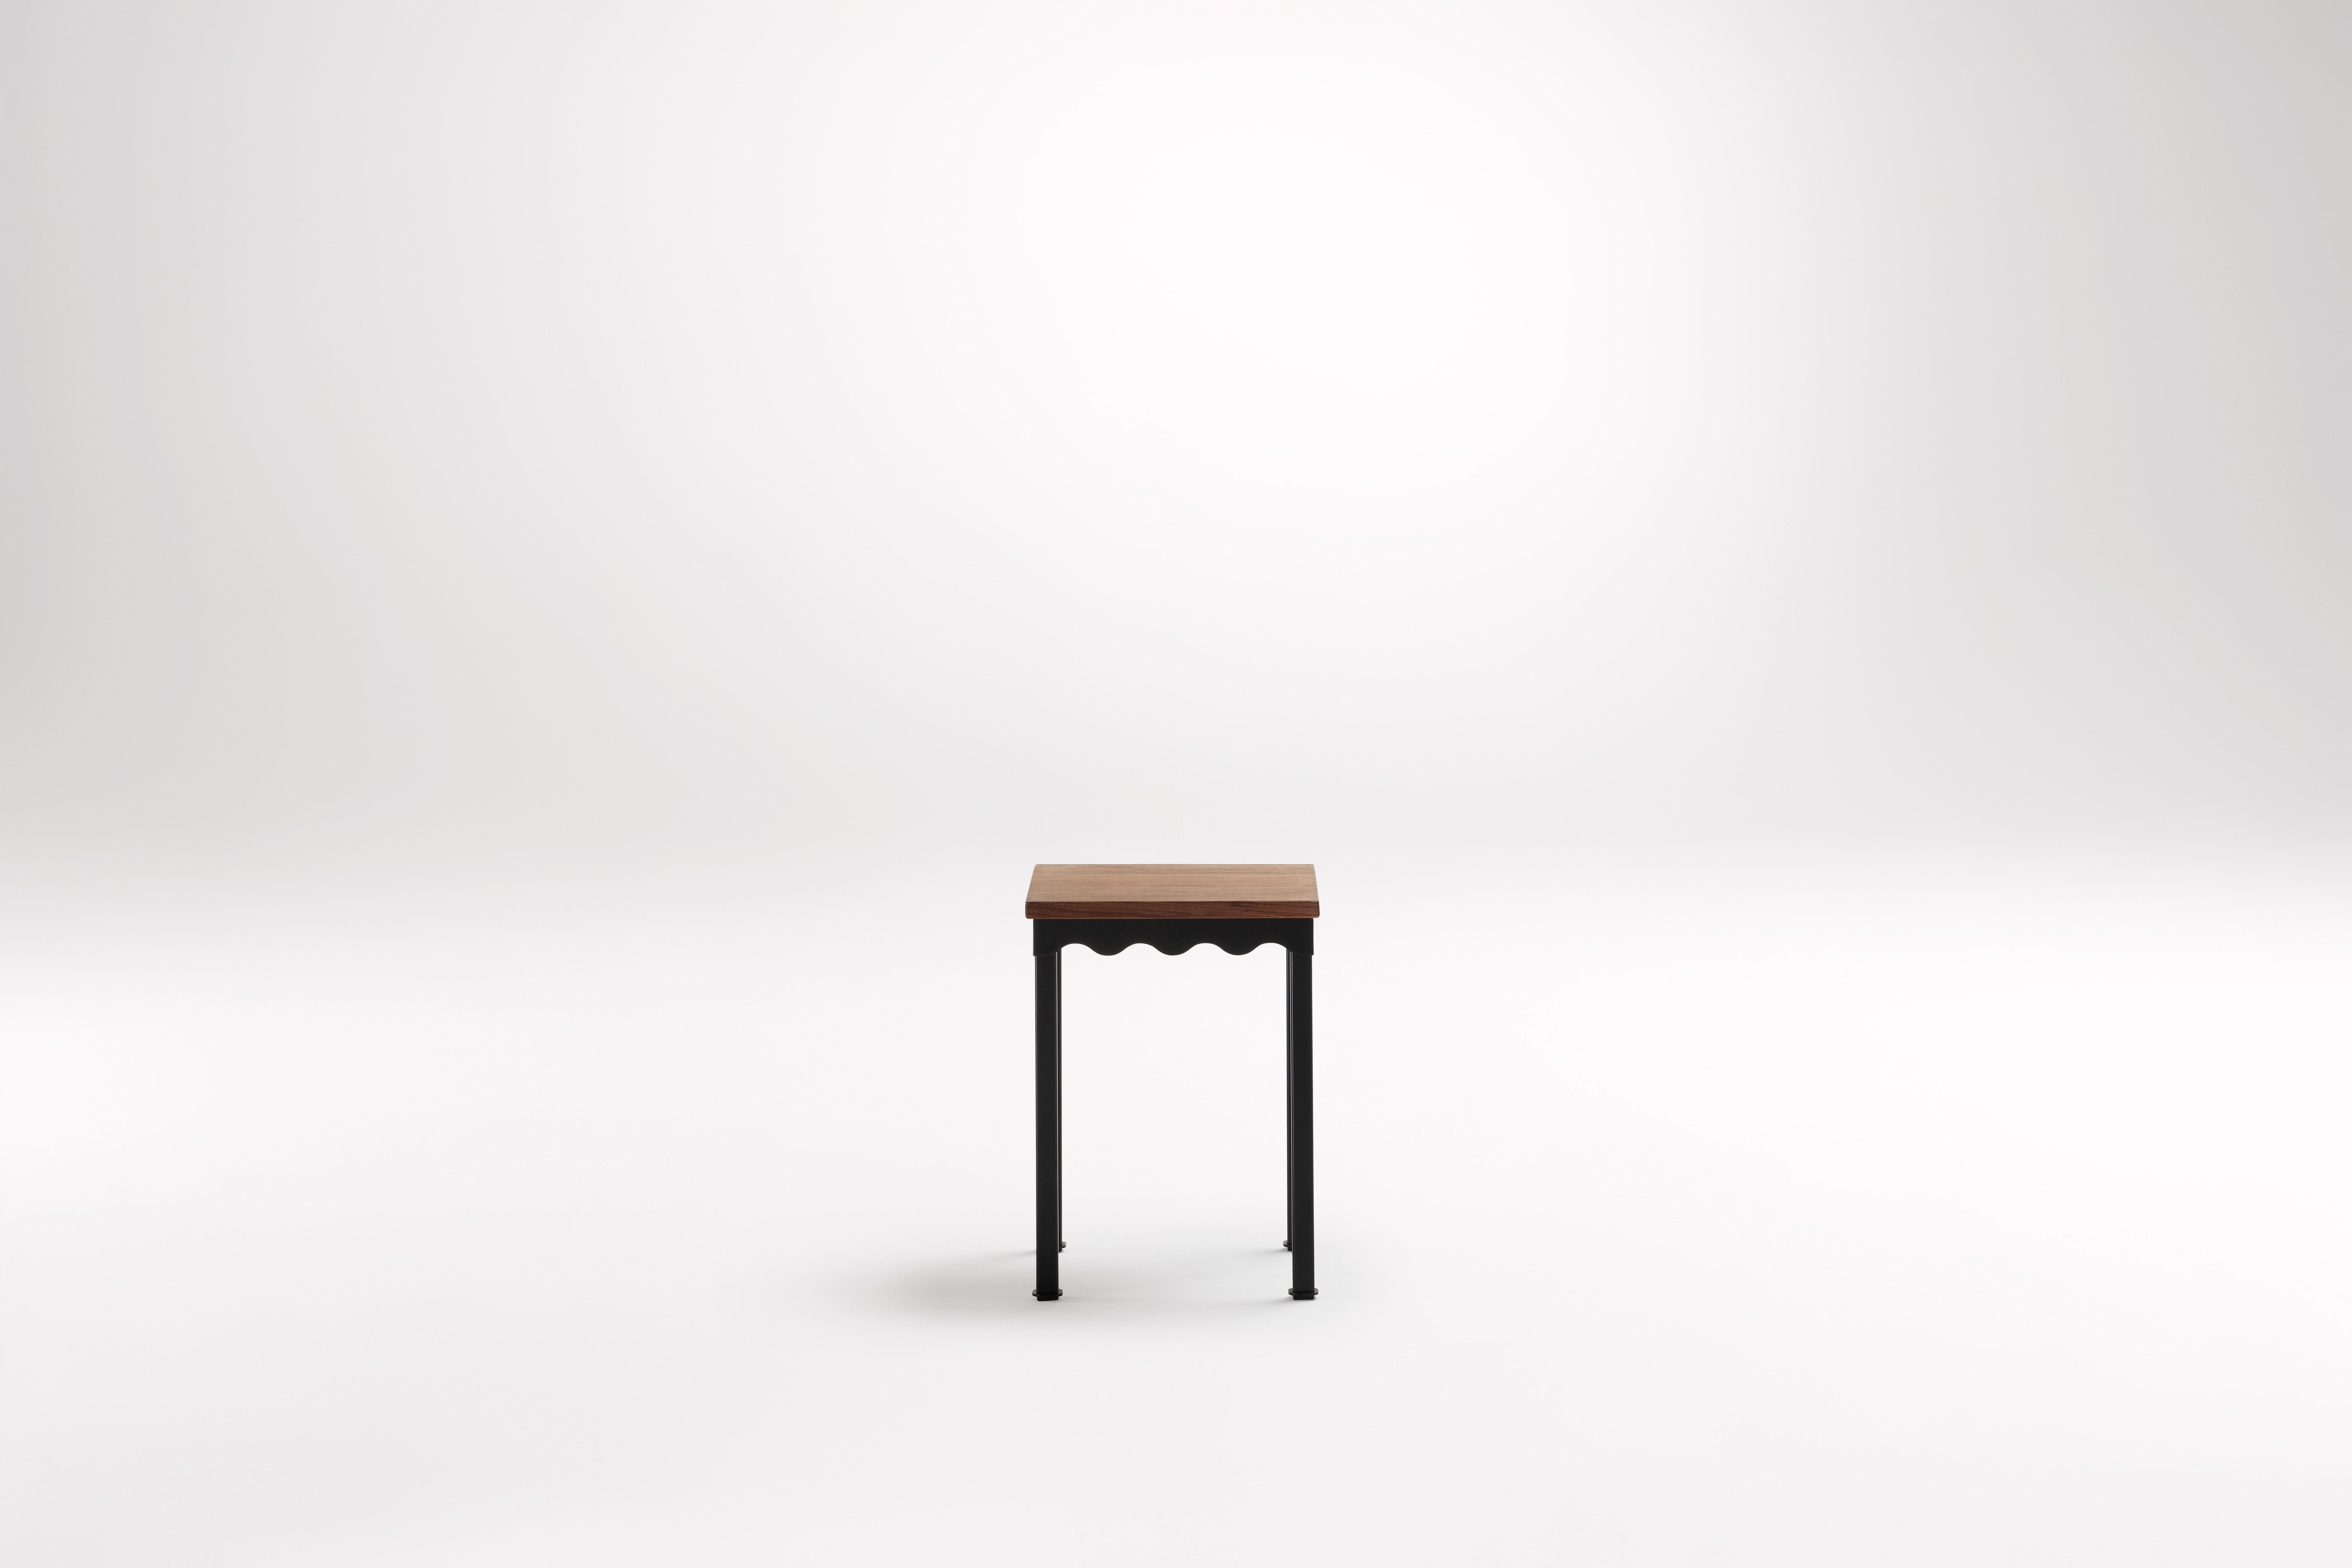 Blackwood Bellini Low Stool by Coco Flip
Dimensions: D 34 x W 34 x H 45 cm
Materials: Timber / Stone tops, Powder-coated steel frame. 
Weight: 5 kg
Timber Tops :Blackwood .
Frame Finishes: Textura Black.

Coco Flip is a Melbourne based furniture and